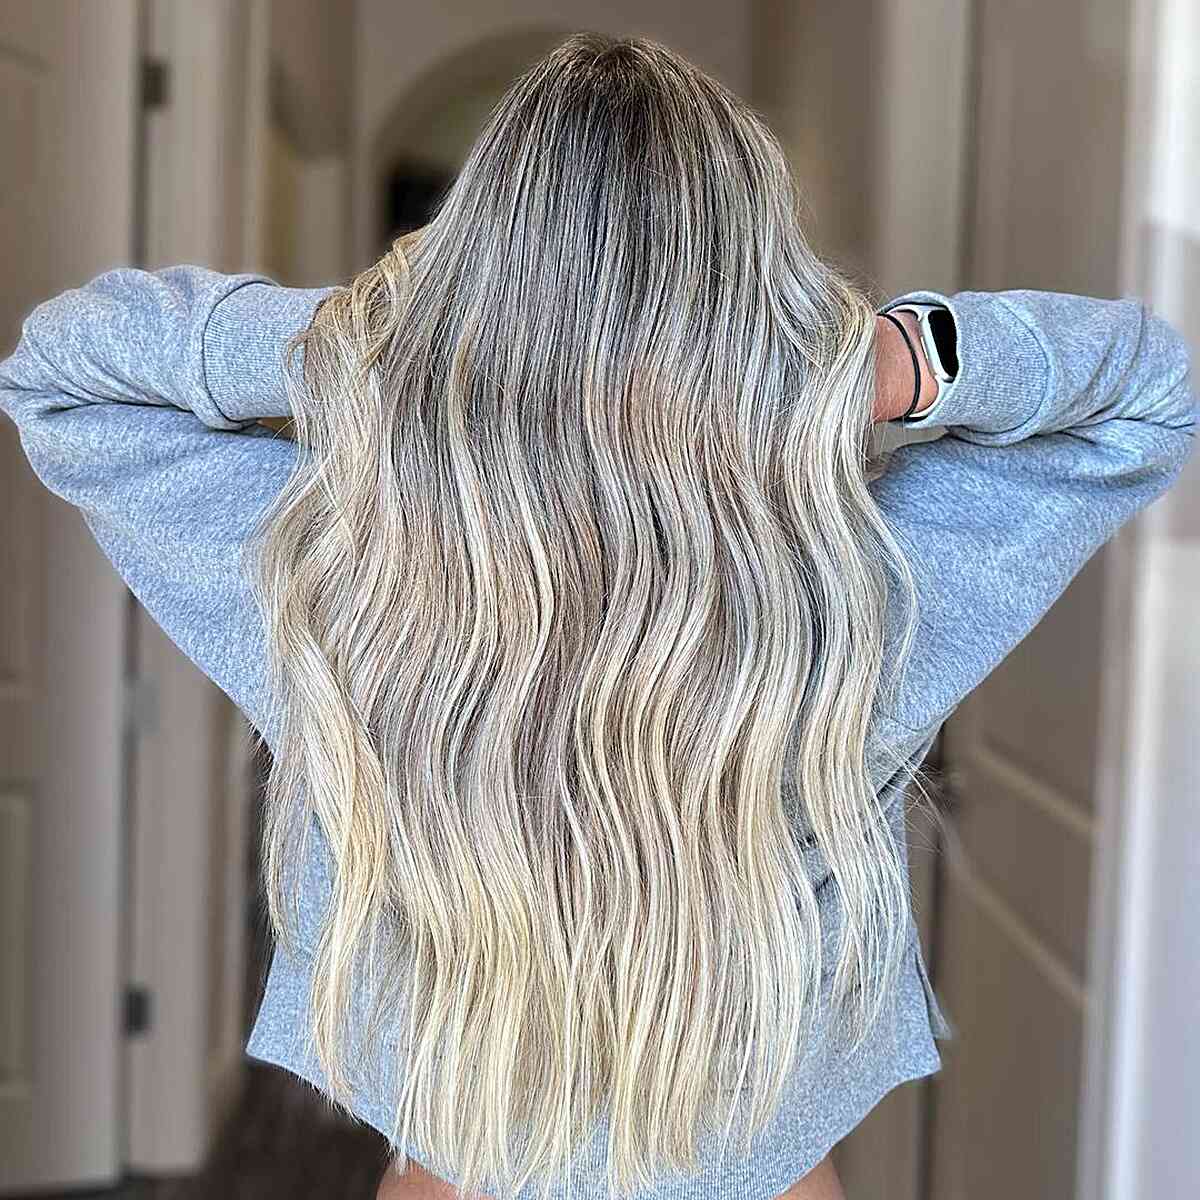 Long Icy Blonde Balayage Waves with Darker Roots and Soft Waves